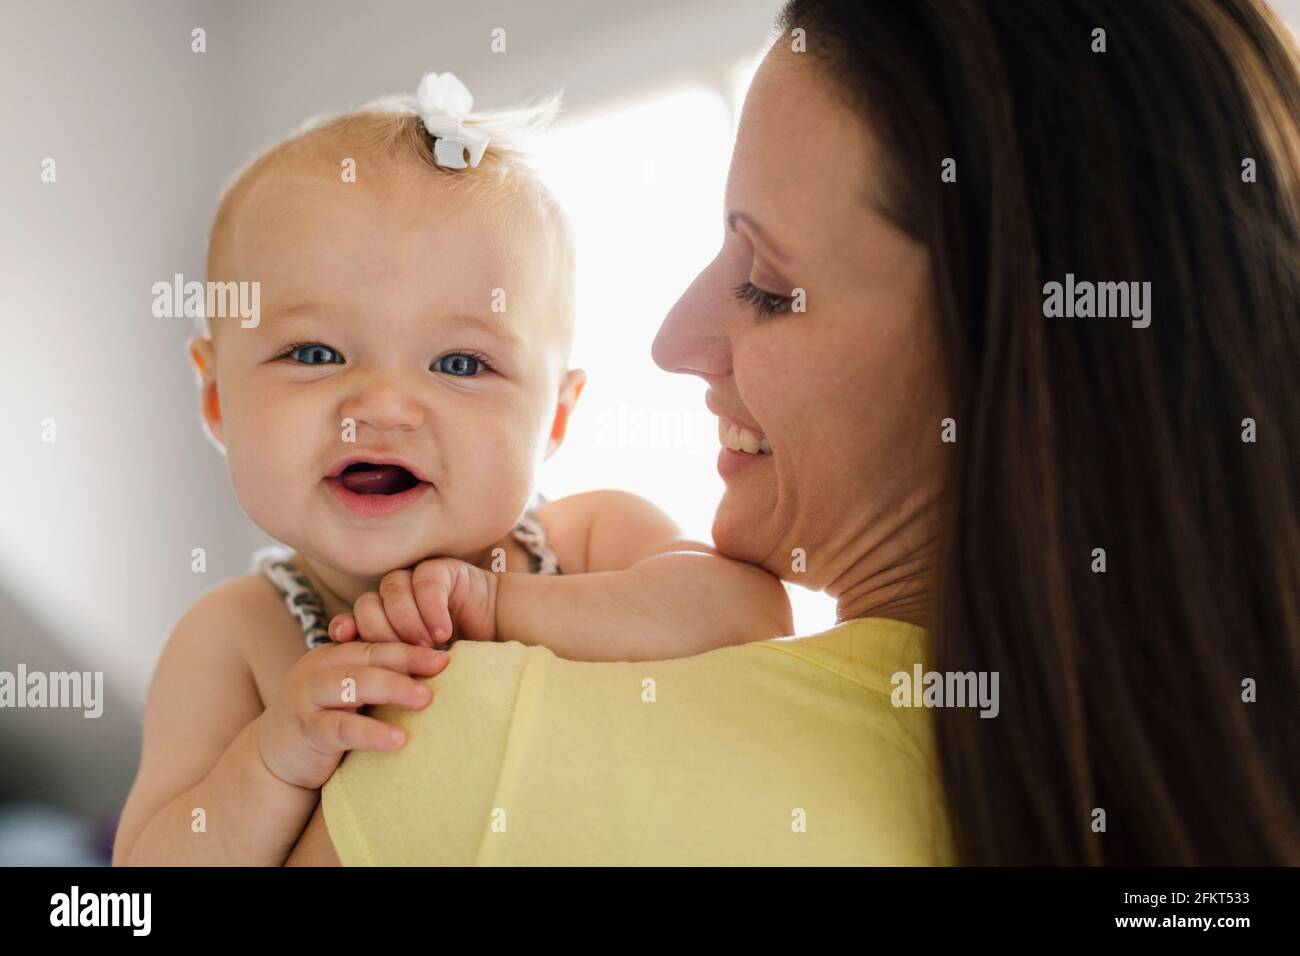 Over the shoulder portrait view of happy baby girl and mid adult mother Stock Photo